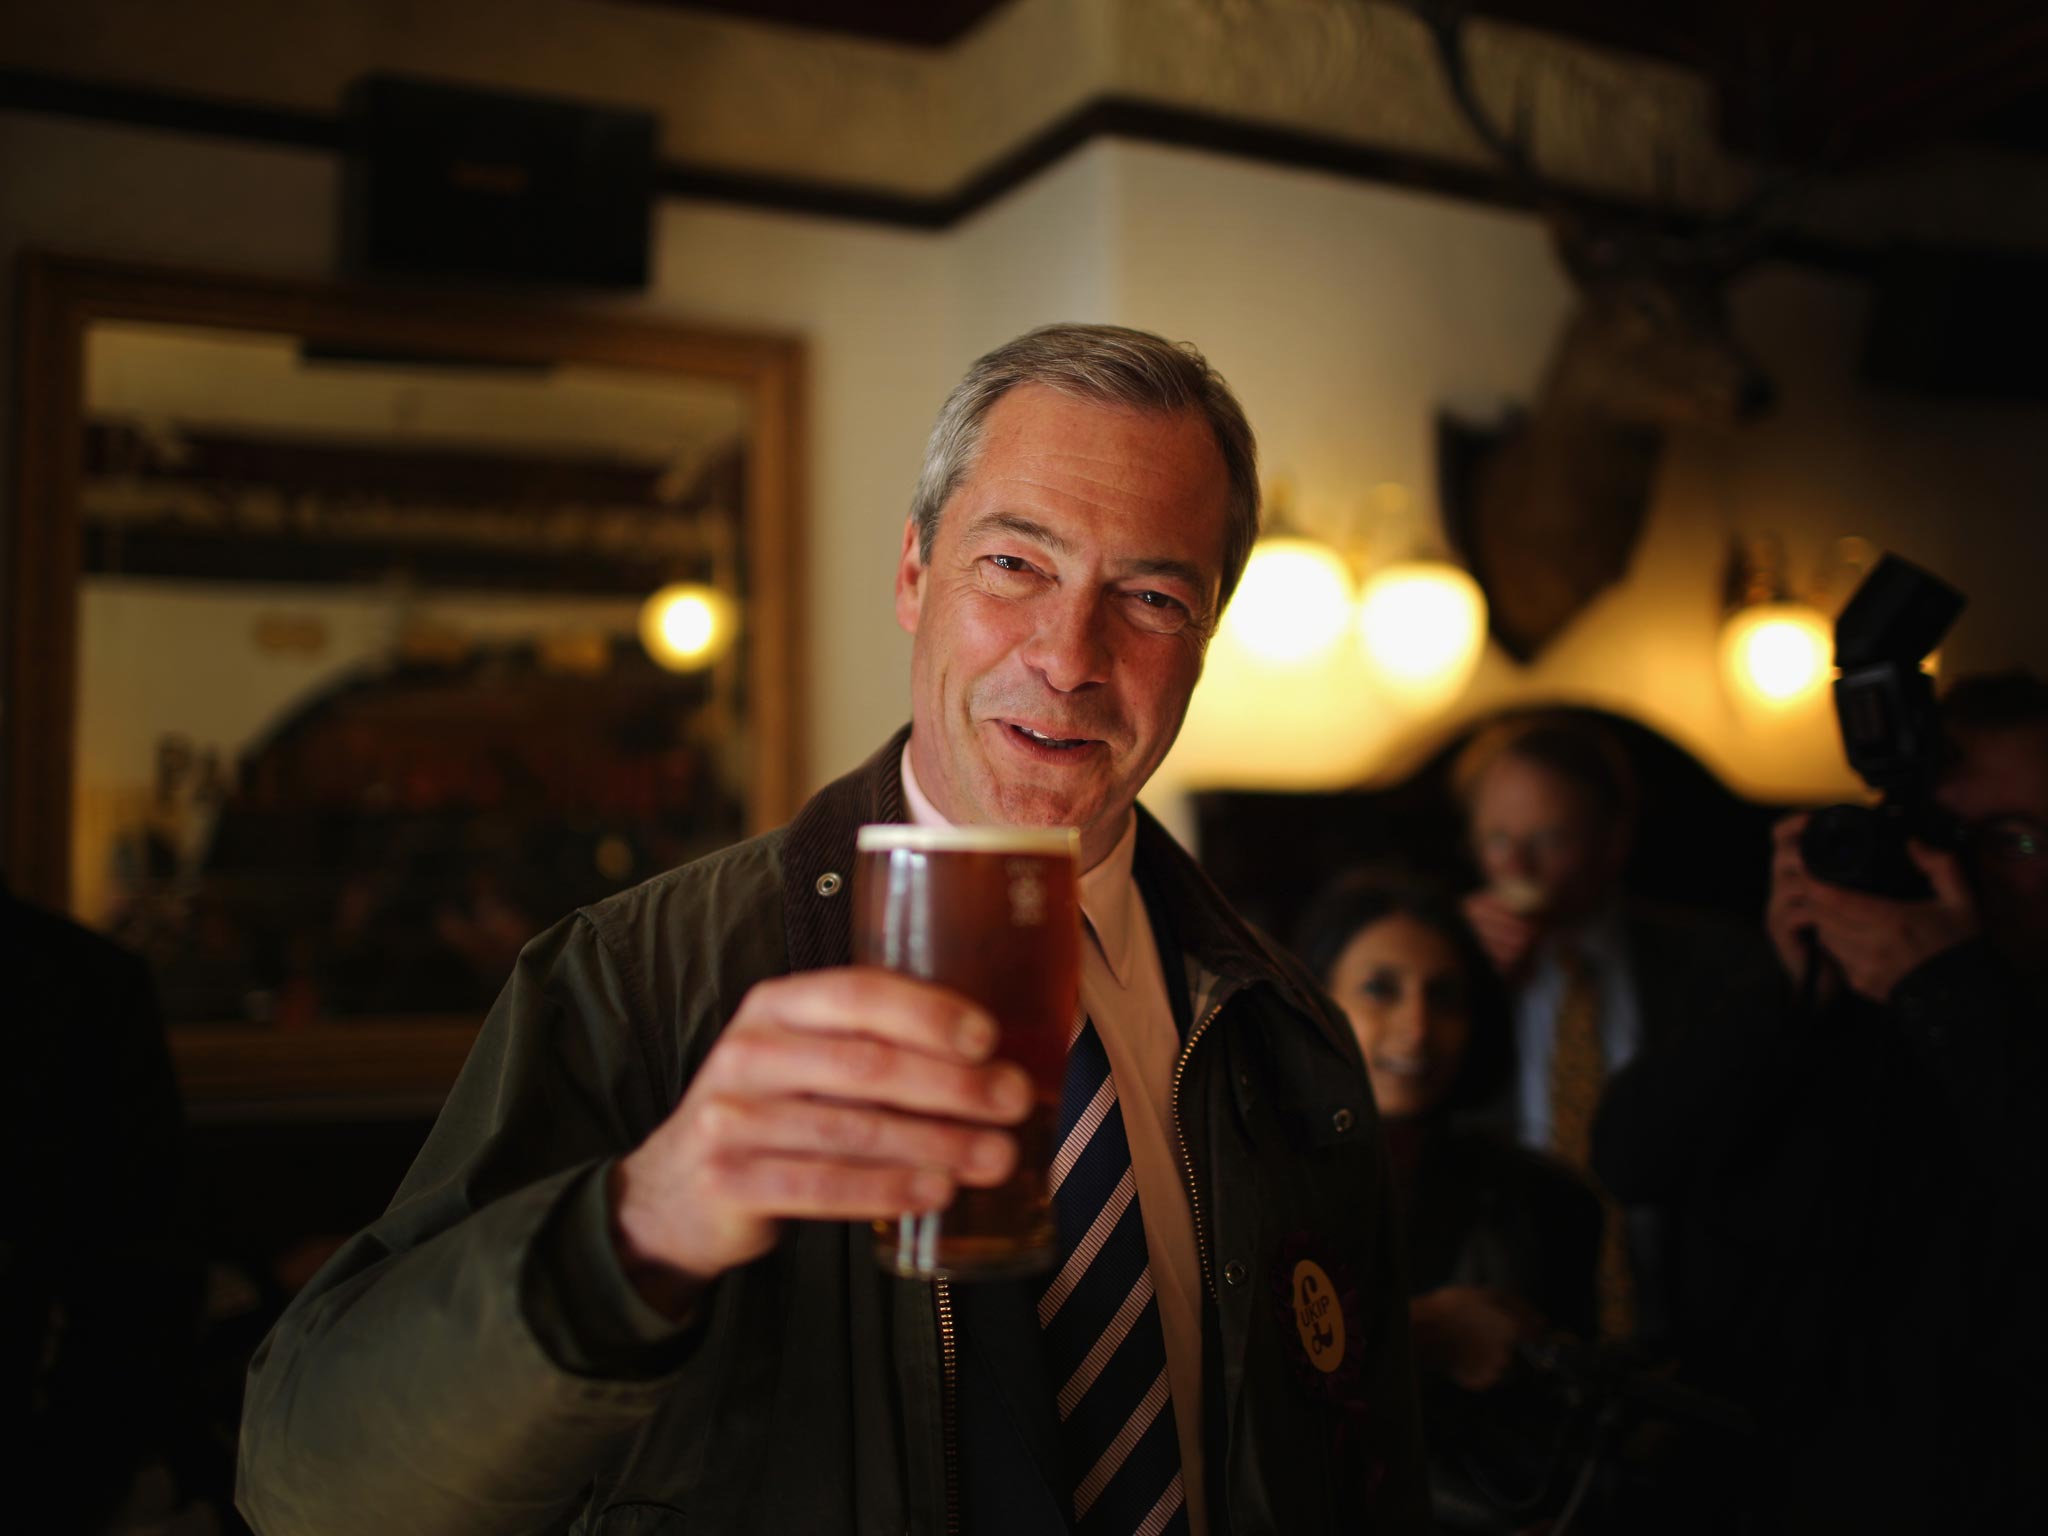 The Labour Party has branded Nigel Farage a “phoney” and a “bull**** artist”